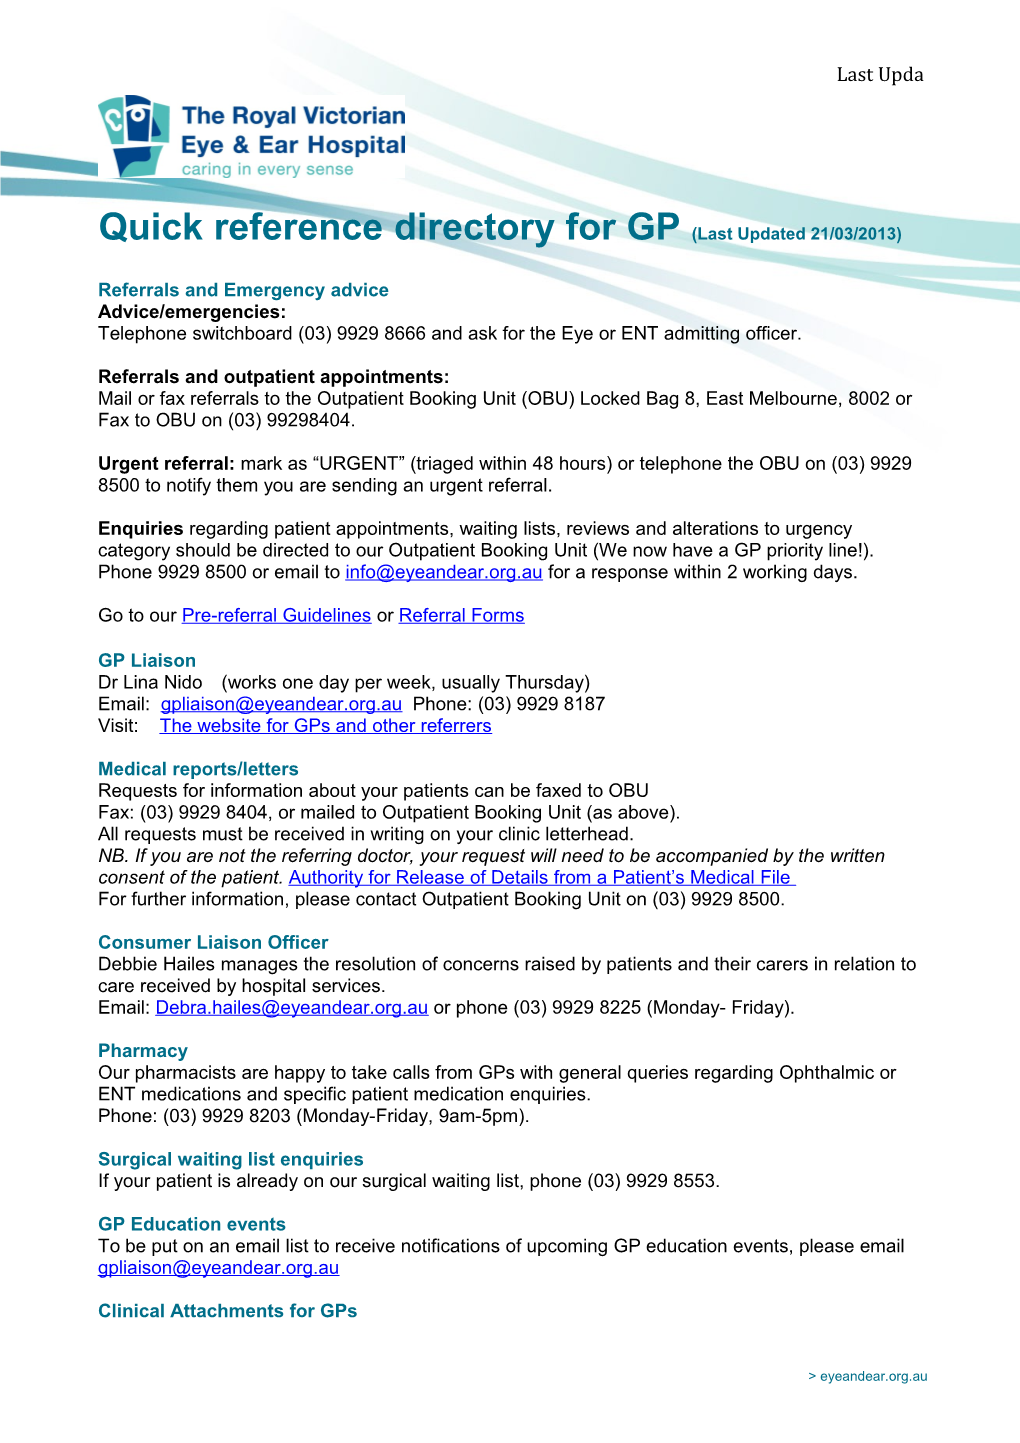 Referrals and Emergency Advice